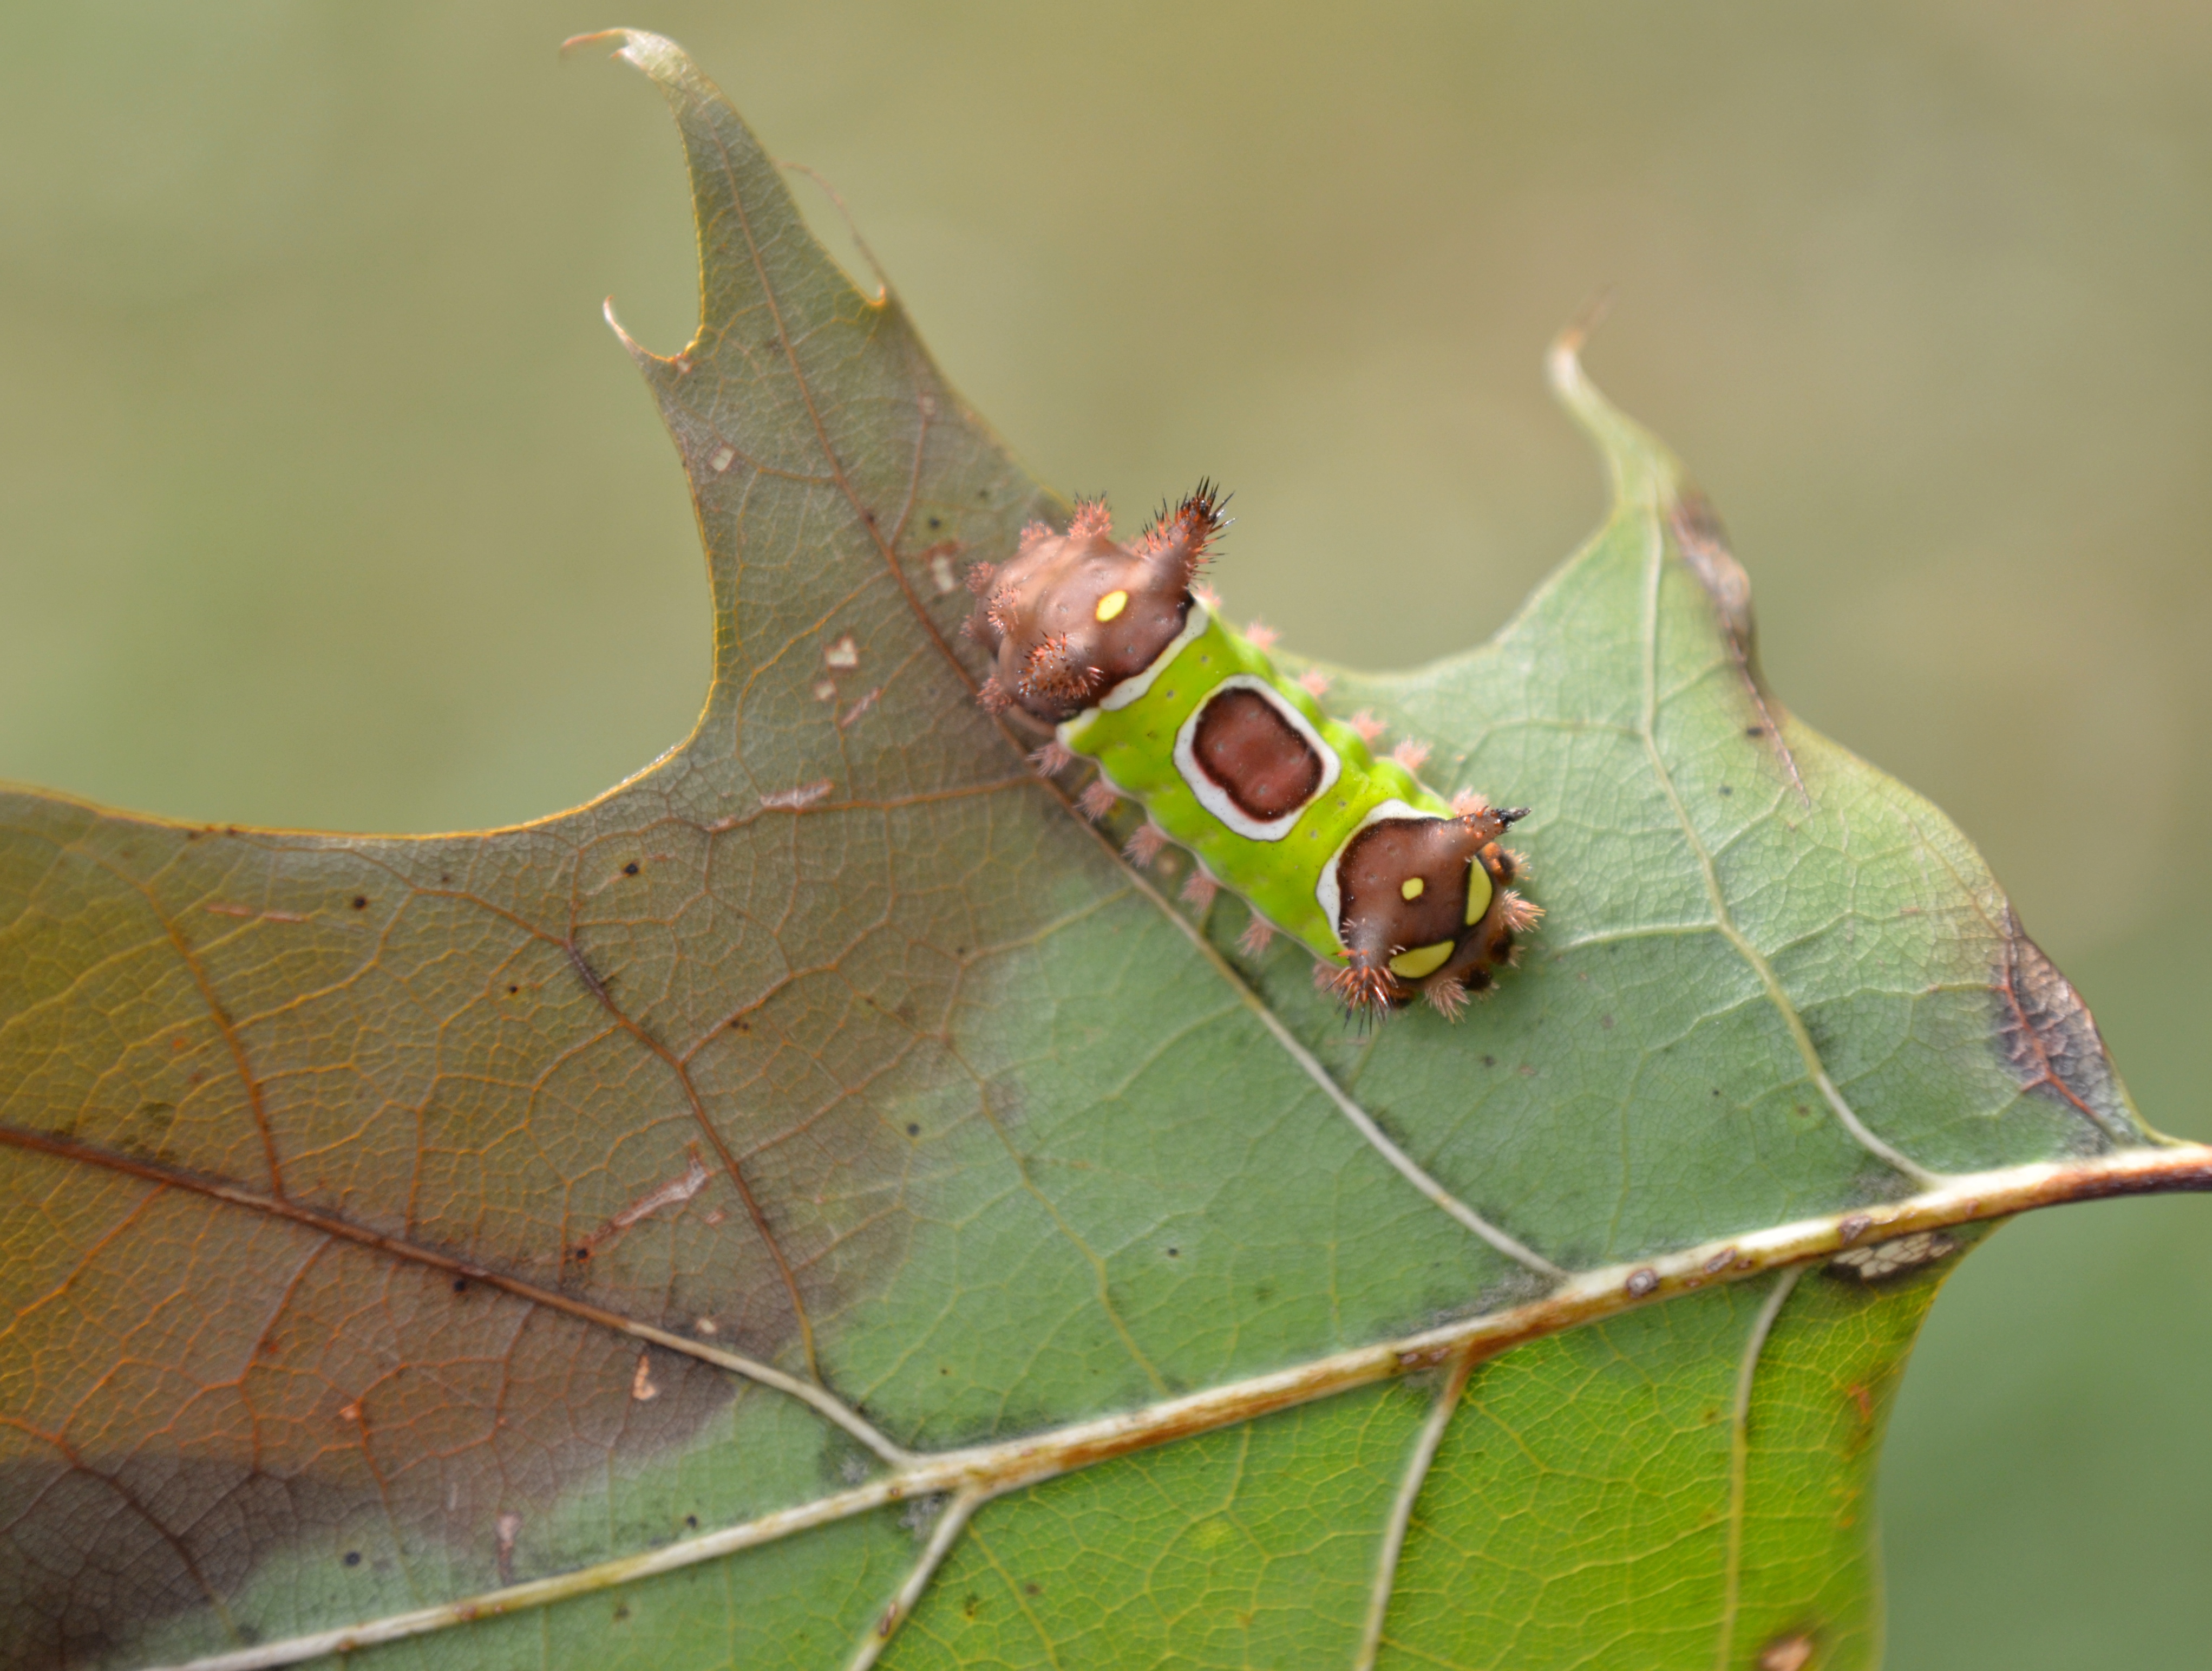 Saddleback caterpillar shown here on an oak leaf but it can be found on many landscaping plants including maples, palms, blueberries, viburnum, holly, aster, buttonbush and even grass.